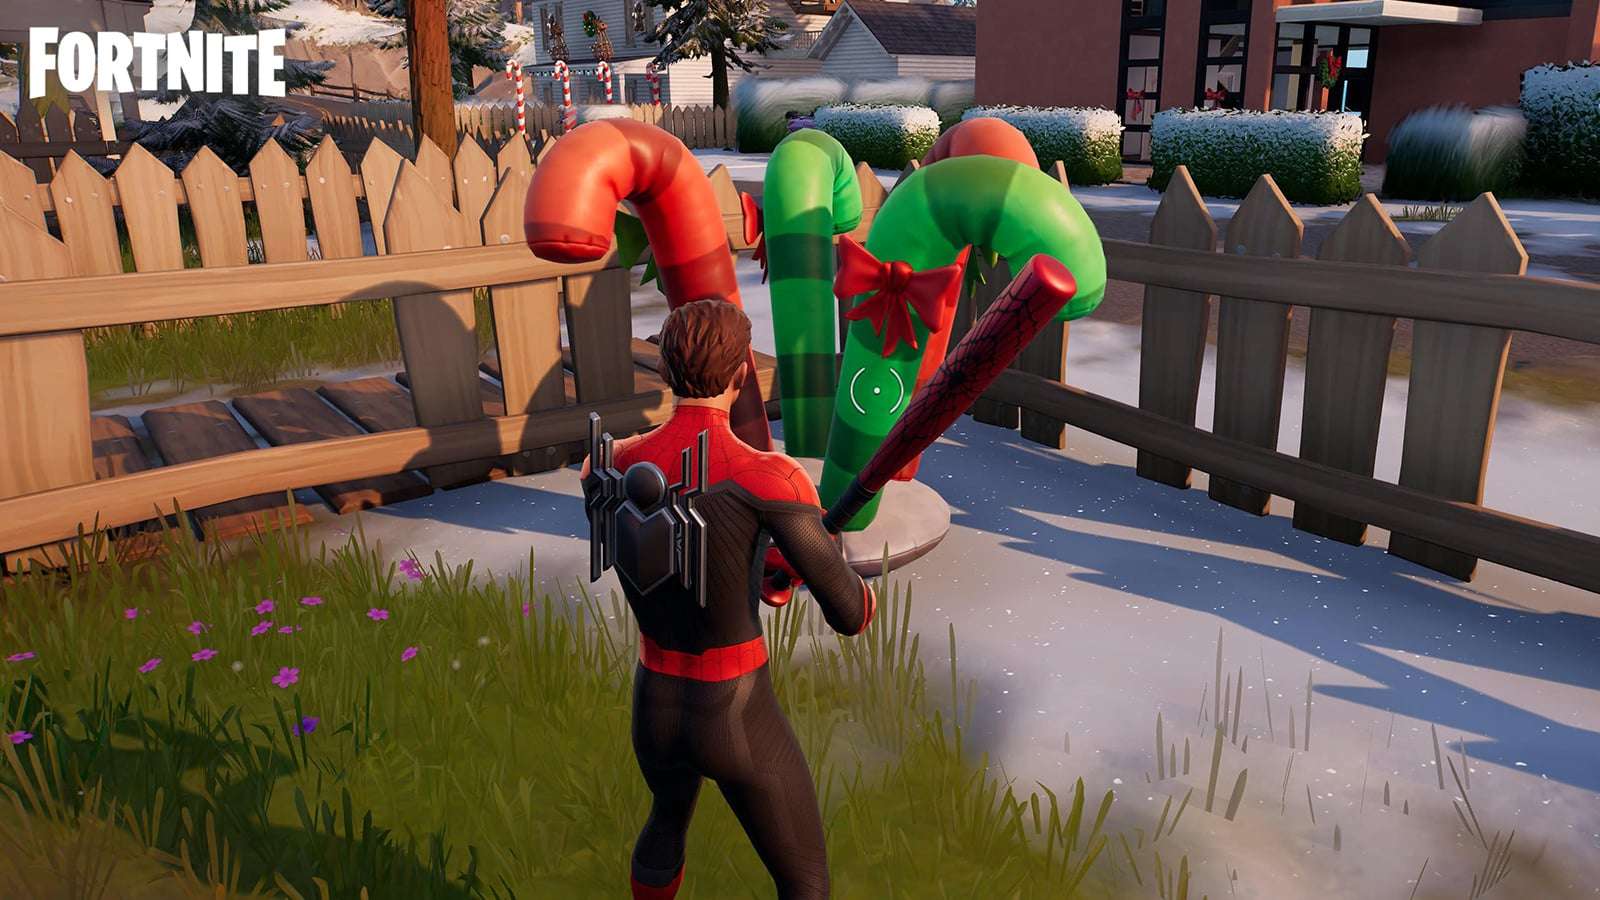 Christmas Tree Decorations in Fortnite